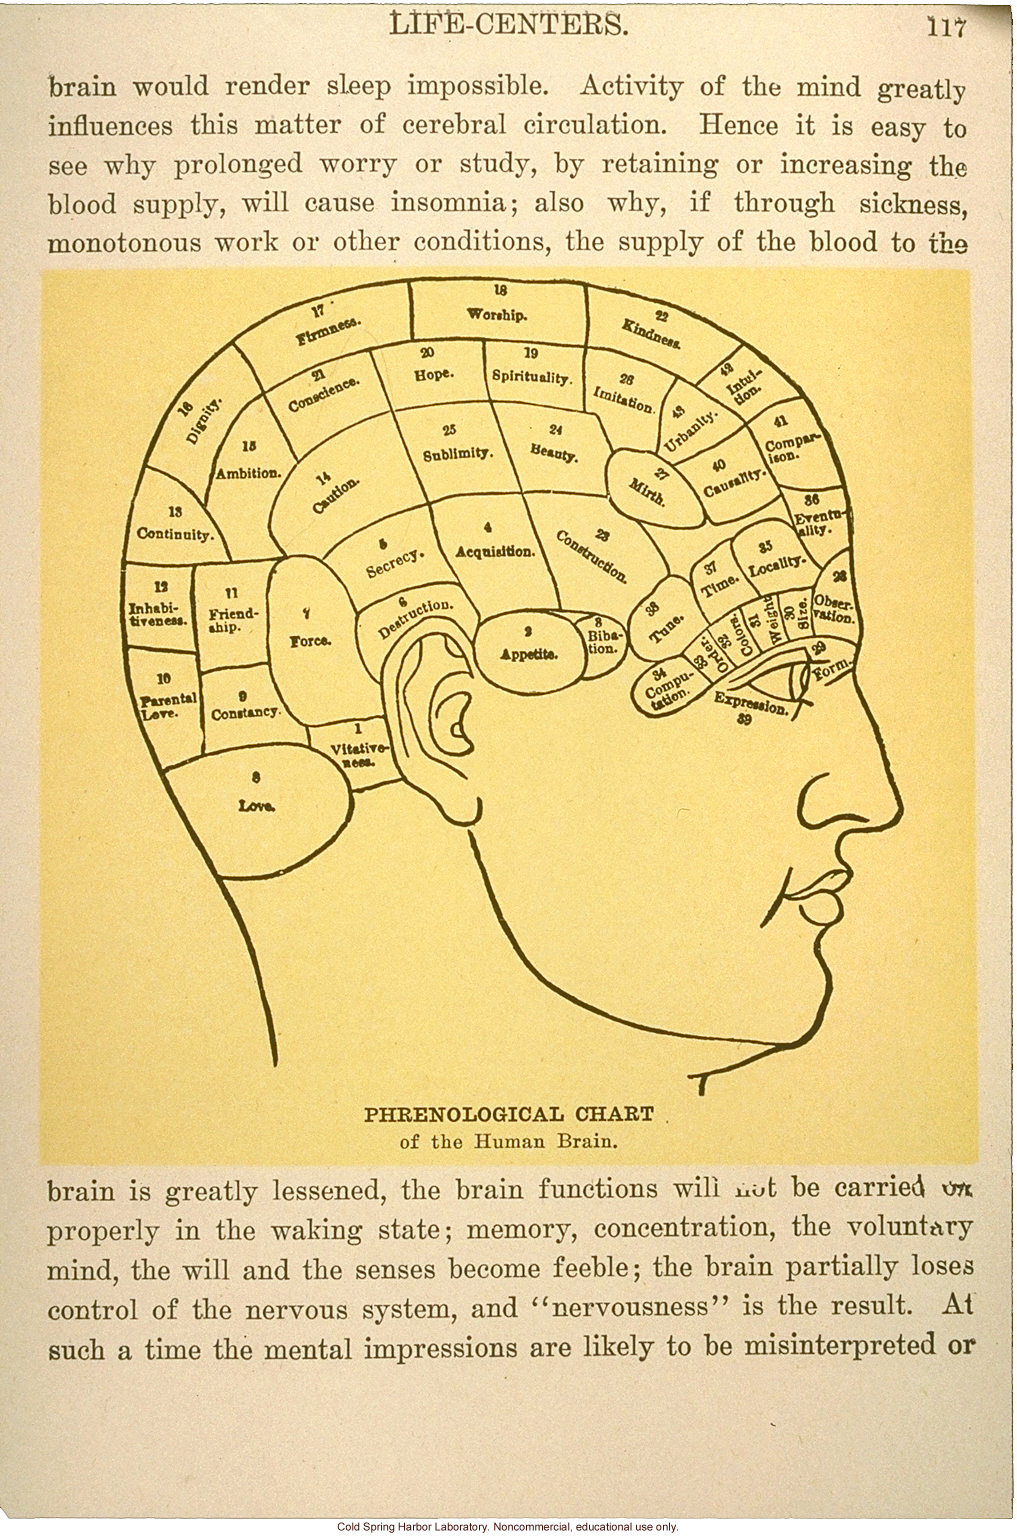 &quote;Phrenological chart of the human brain&quote;
